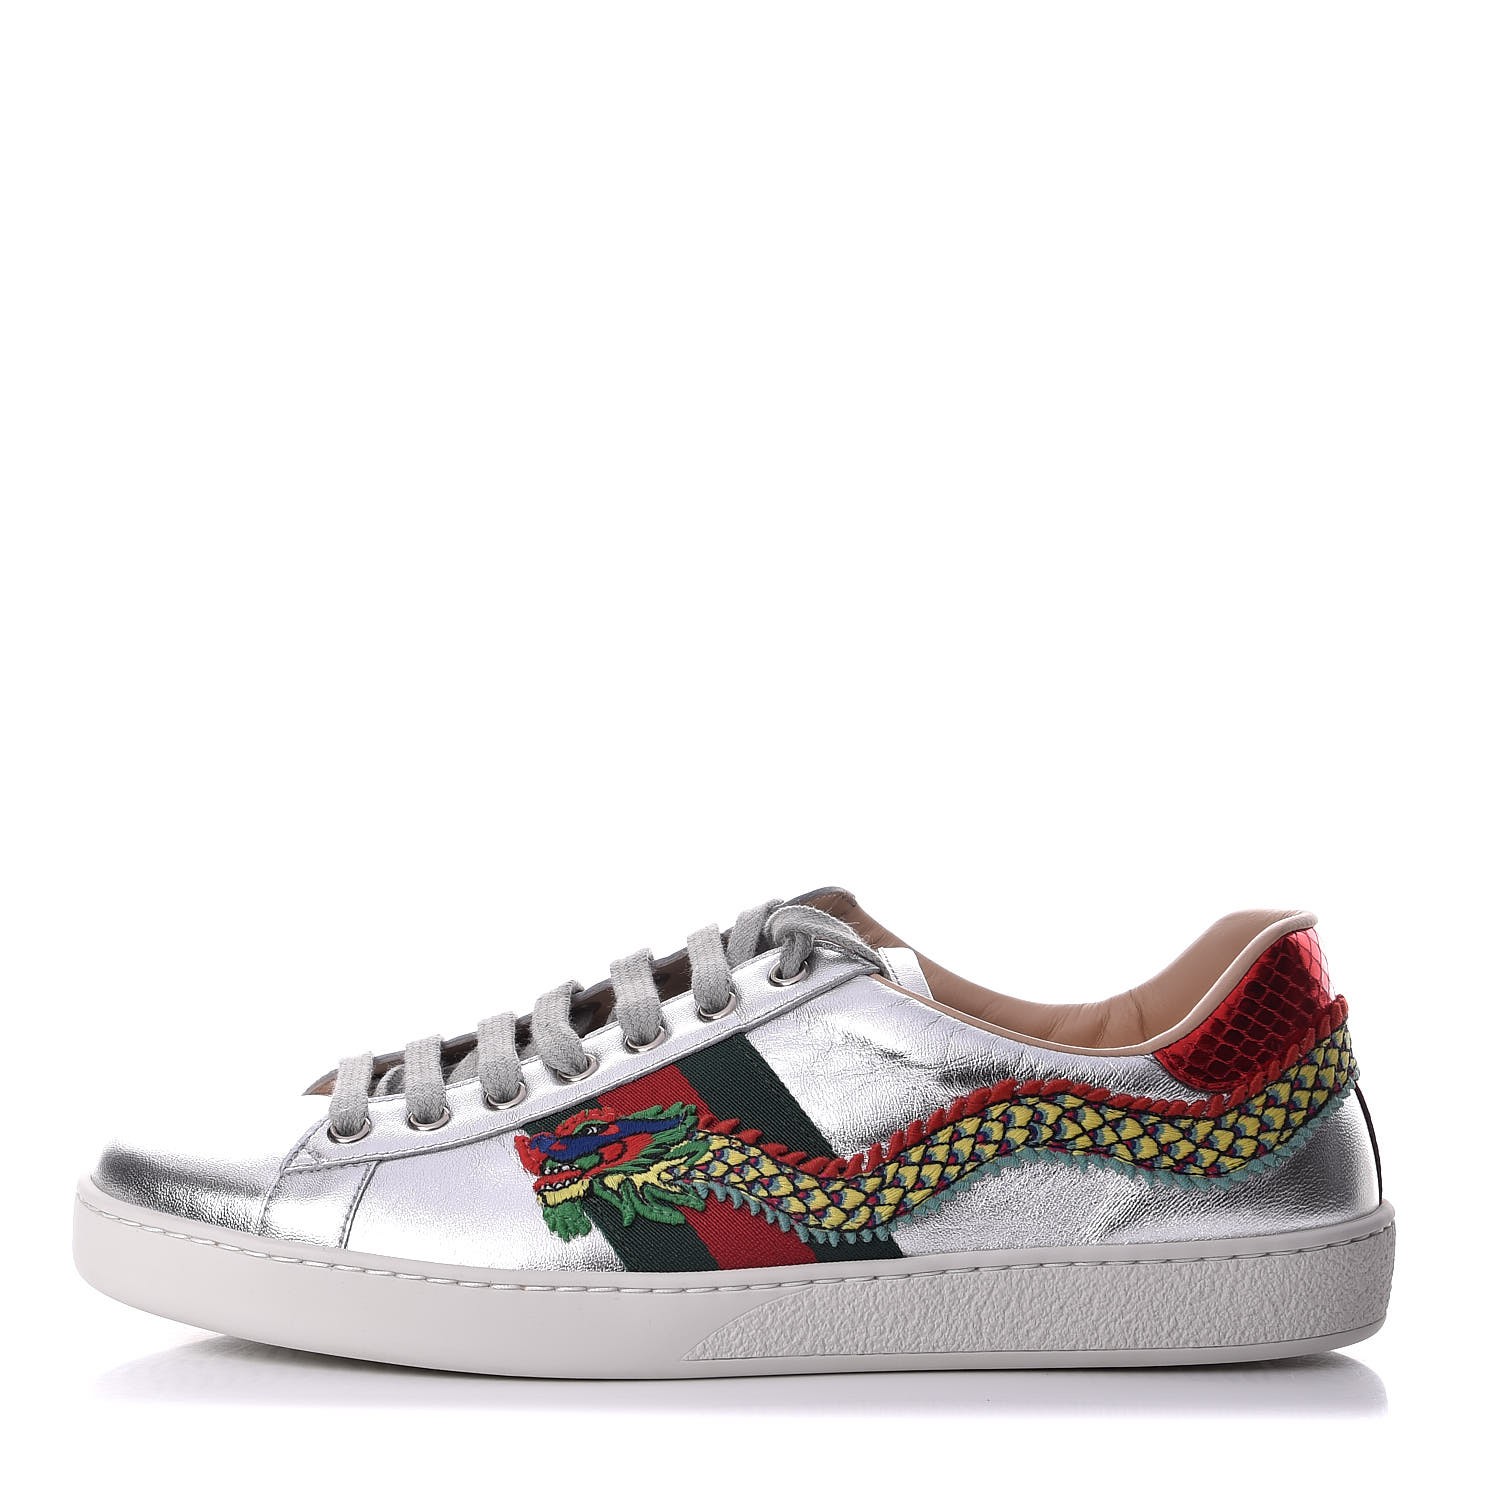 GUCCI Metallic Calfskin Mens Dragon Embroidered New Ace Sneakers 8 Silver 335394